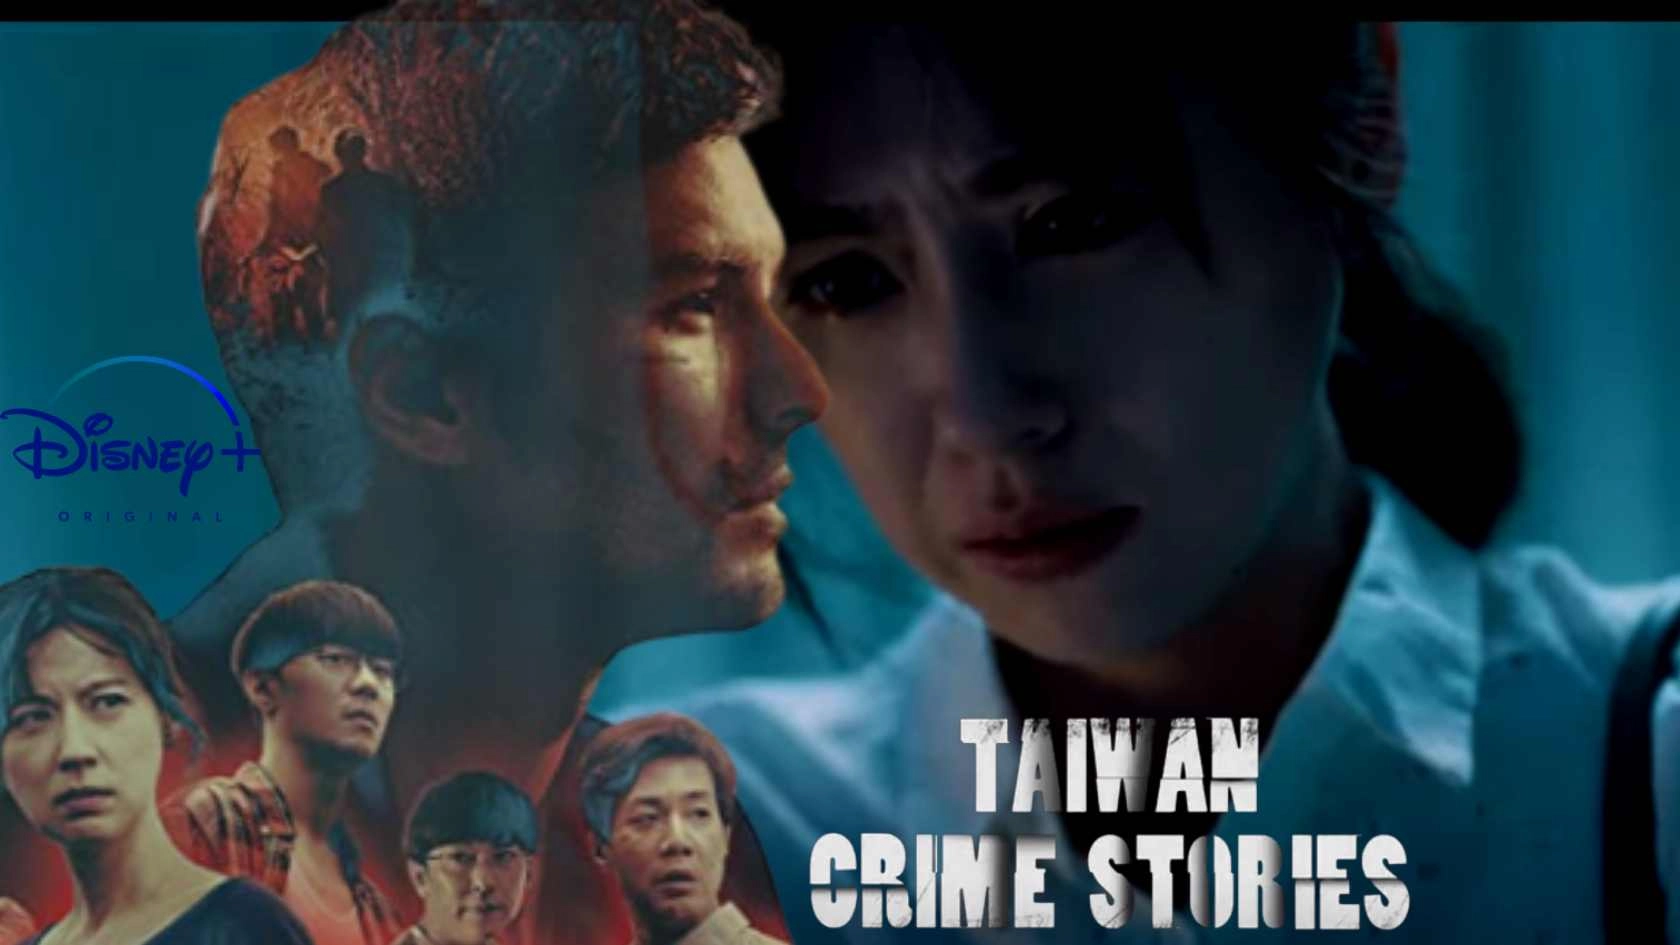 Taiwan Crime Stories Parents Guide and Age Rating (2023)